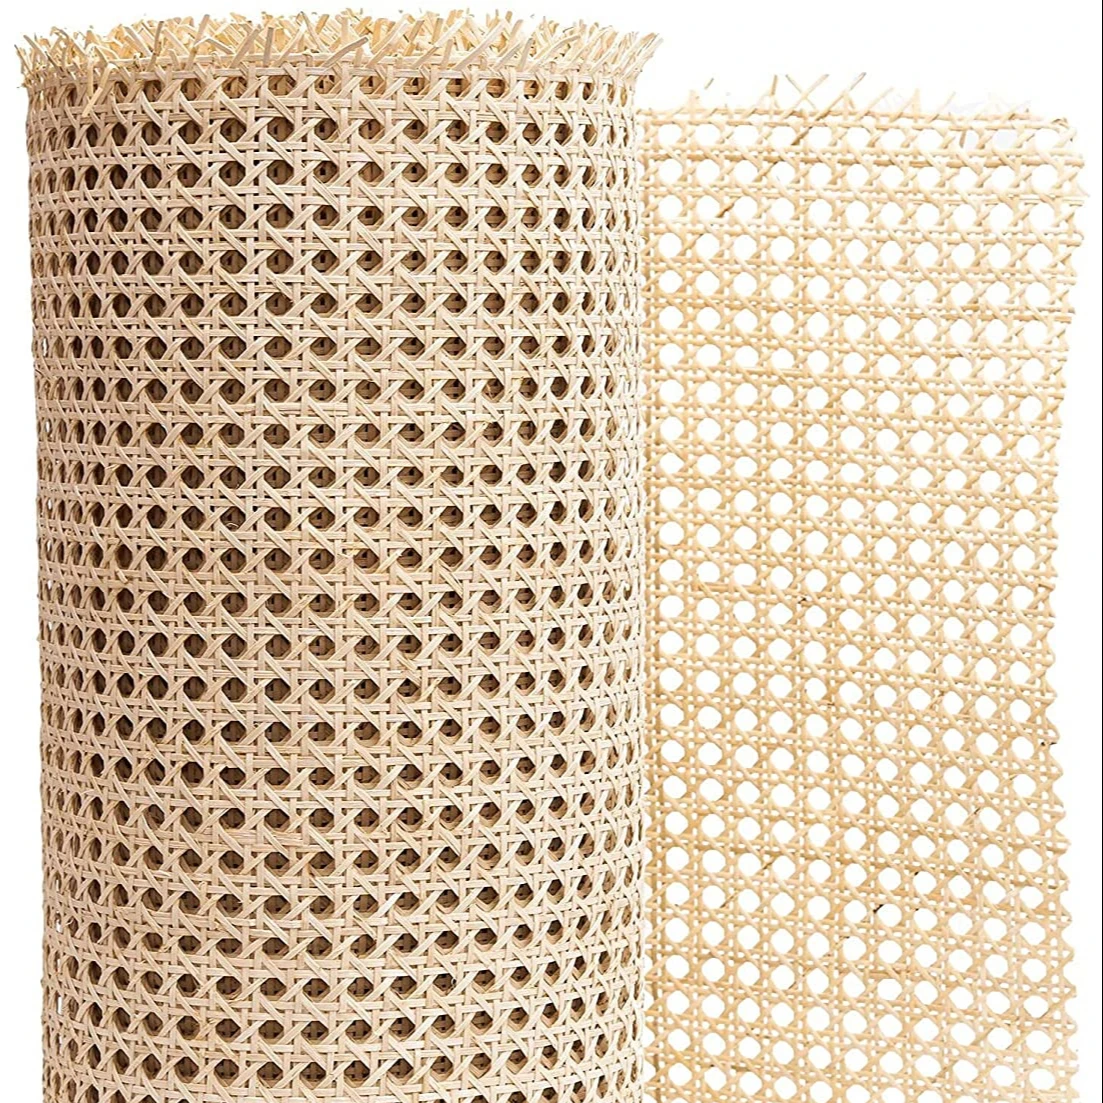 wholesale natural rattan cane webbing roll/